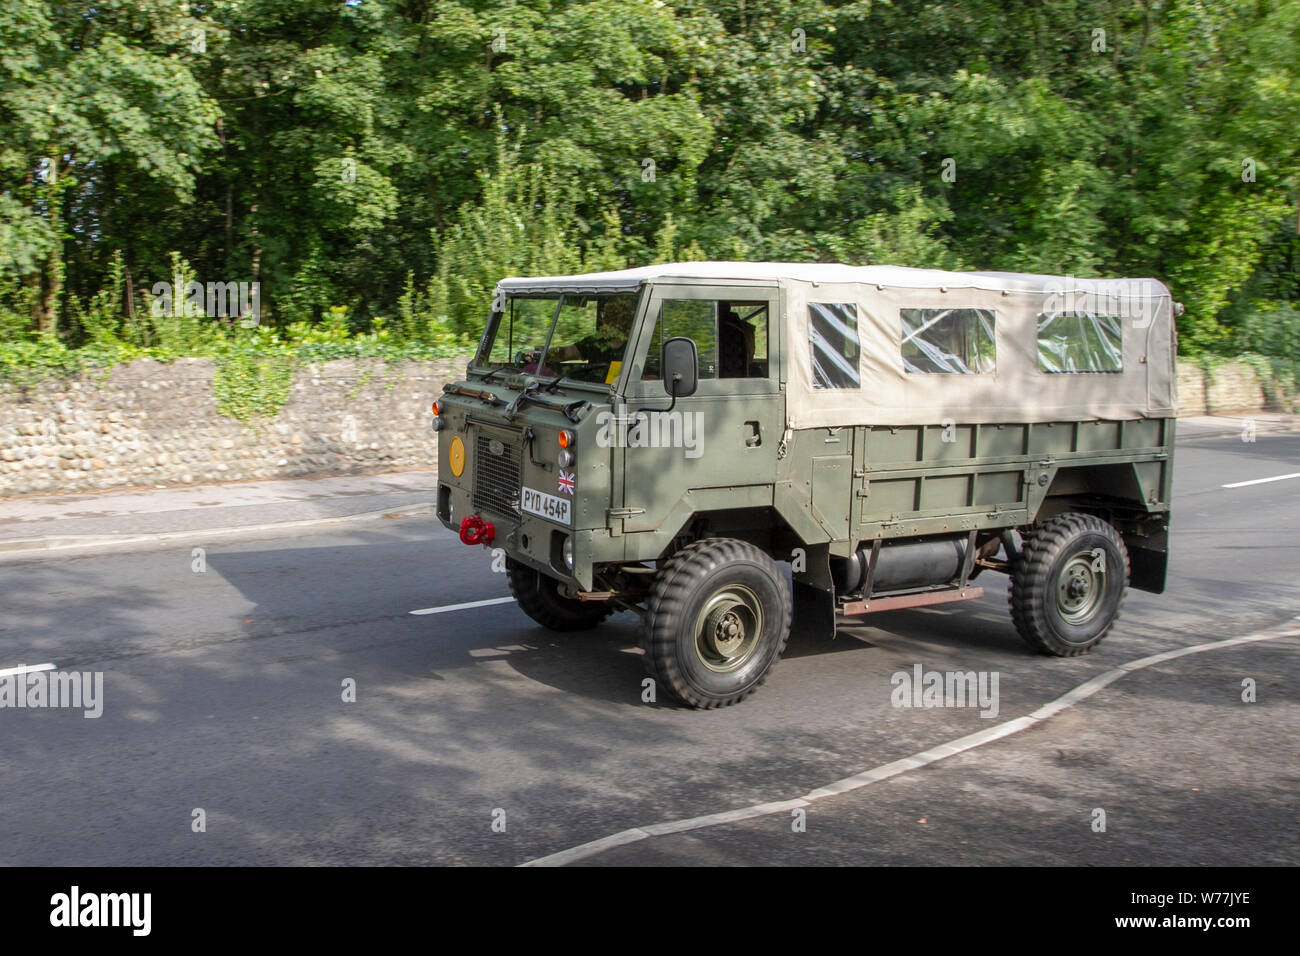 1975 70s seventies Land Rover A4 101 FORWARD CONTROL, 101FC a vintage light utility vehicle produced by Land Rover for the British Army. An unusual V8-powered four-wheel drive army transport vehlcle. Stock Photo